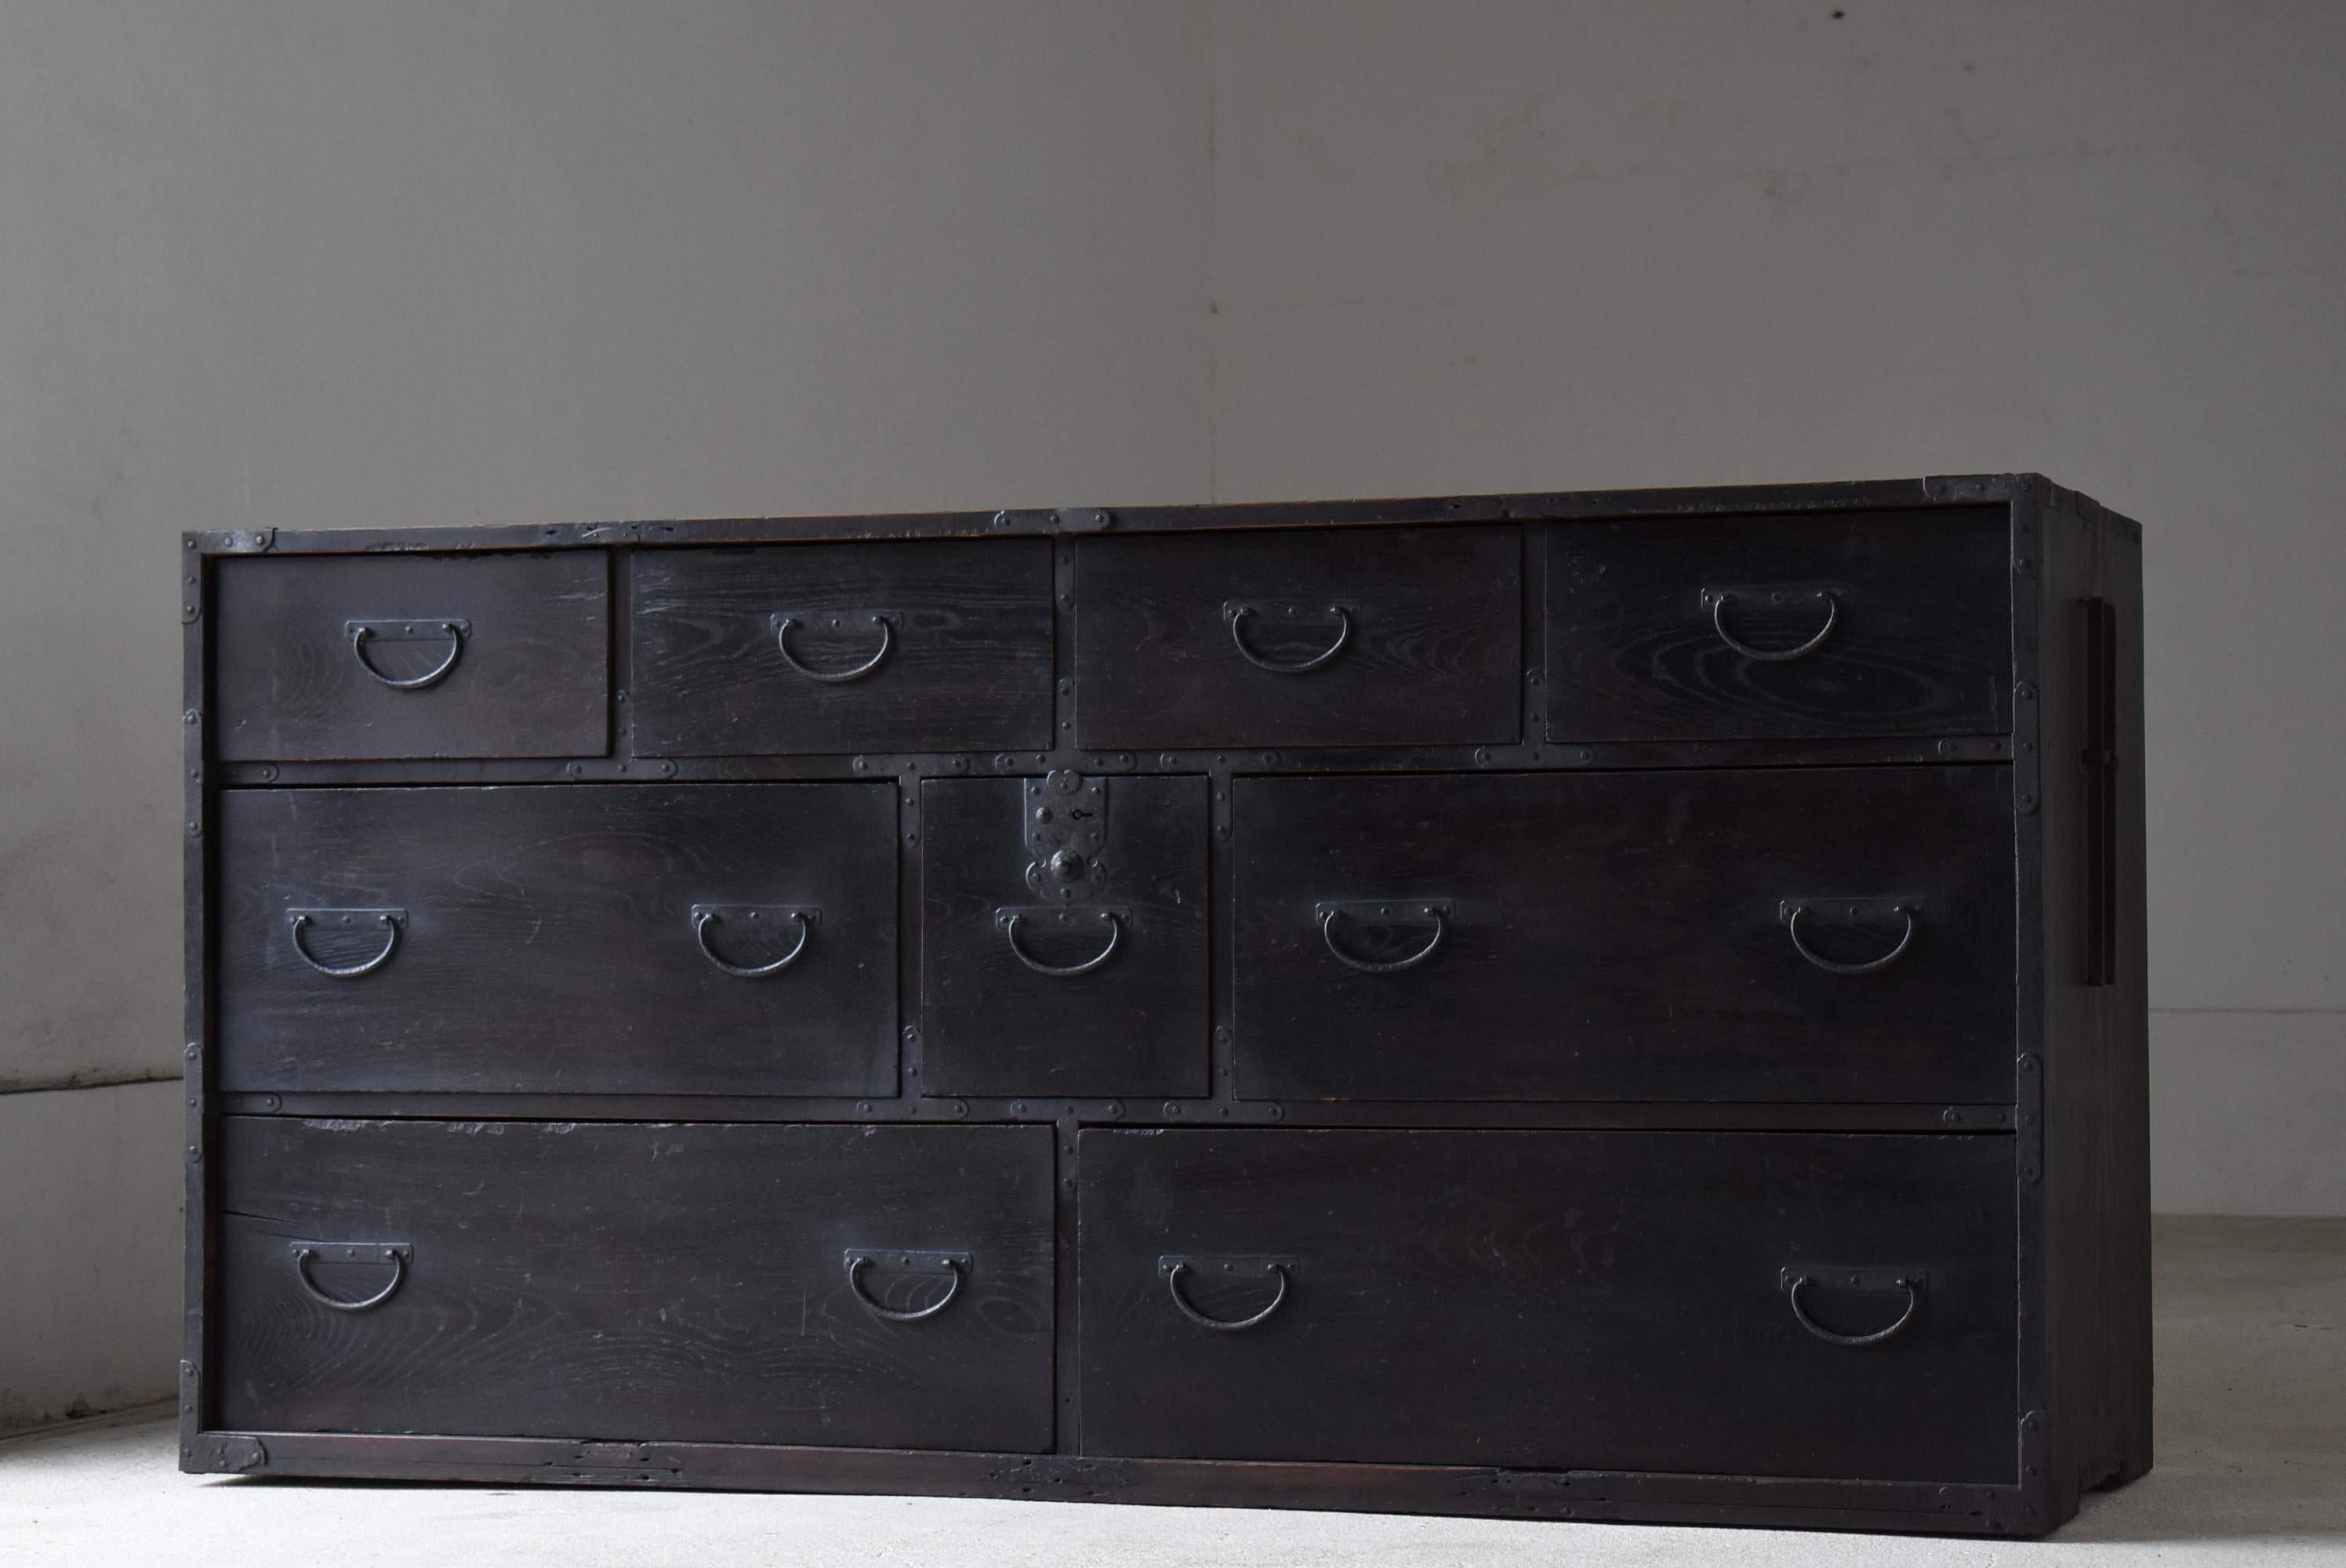 This is a very old Japanese large drawer.
Furniture from the Meiji period (1860s-1900s).
It is made of zelkova and cedar wood.
The handle is made of iron.

It is a very beautiful drawer.
The design is simple and lean.
It's the ultimate in